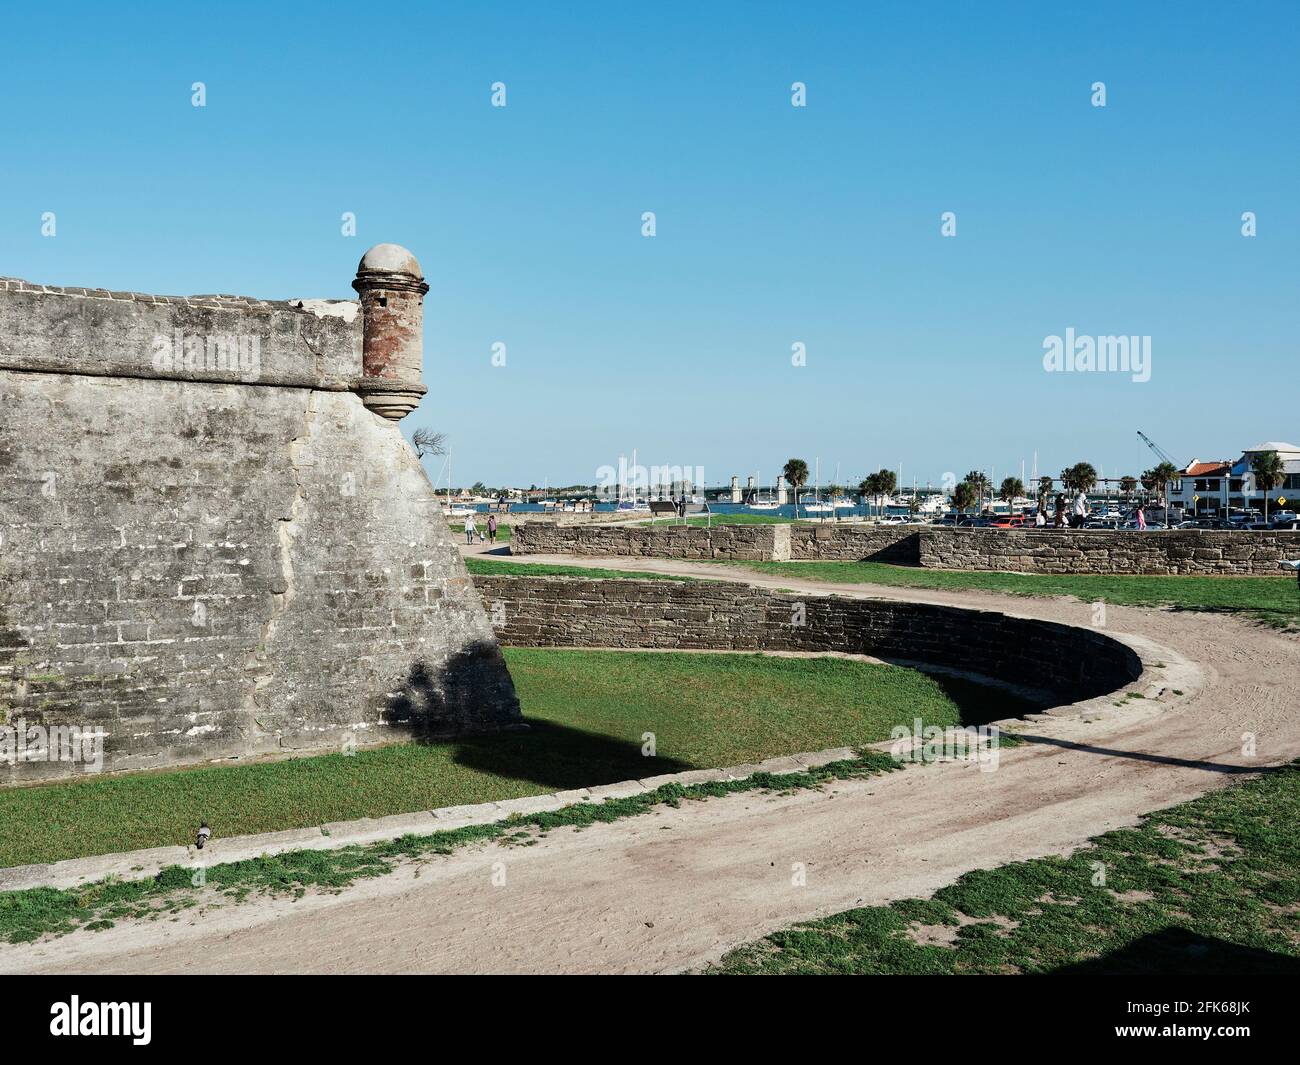 Castillo de San Marcos a large Spanish stone fortress or fort built in the 1600's guards the port in St. Augustine Florida, USA. Stock Photo